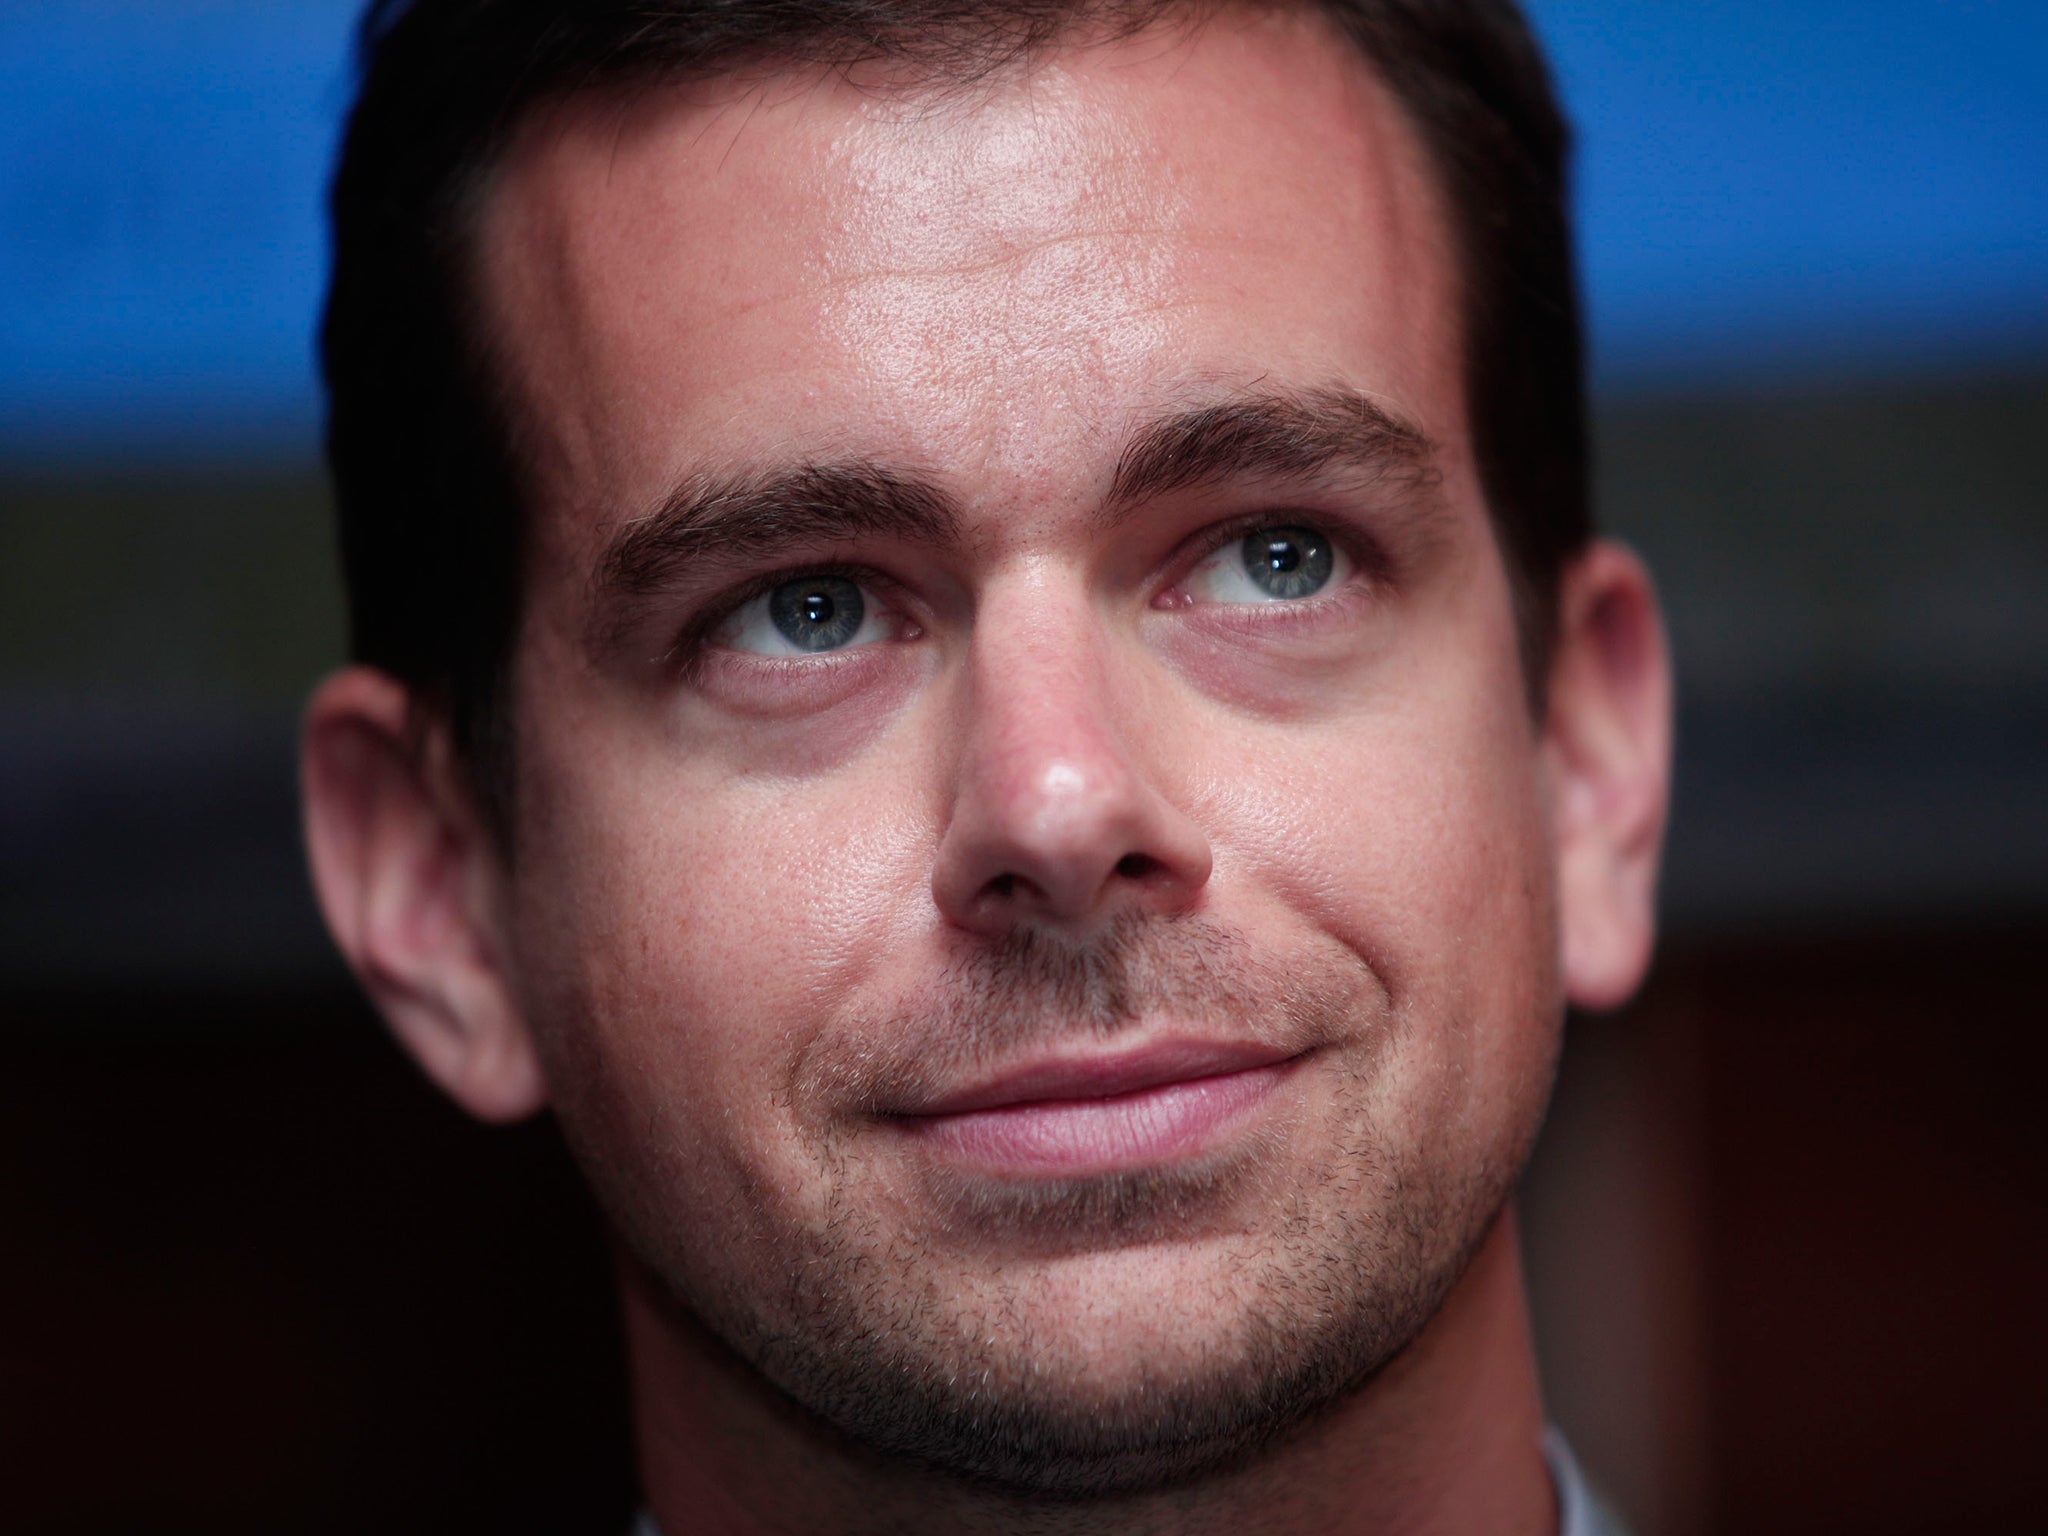 Twitter chief executive Jack Dorsey, has launched Square in the United Kingdom in its first European foray